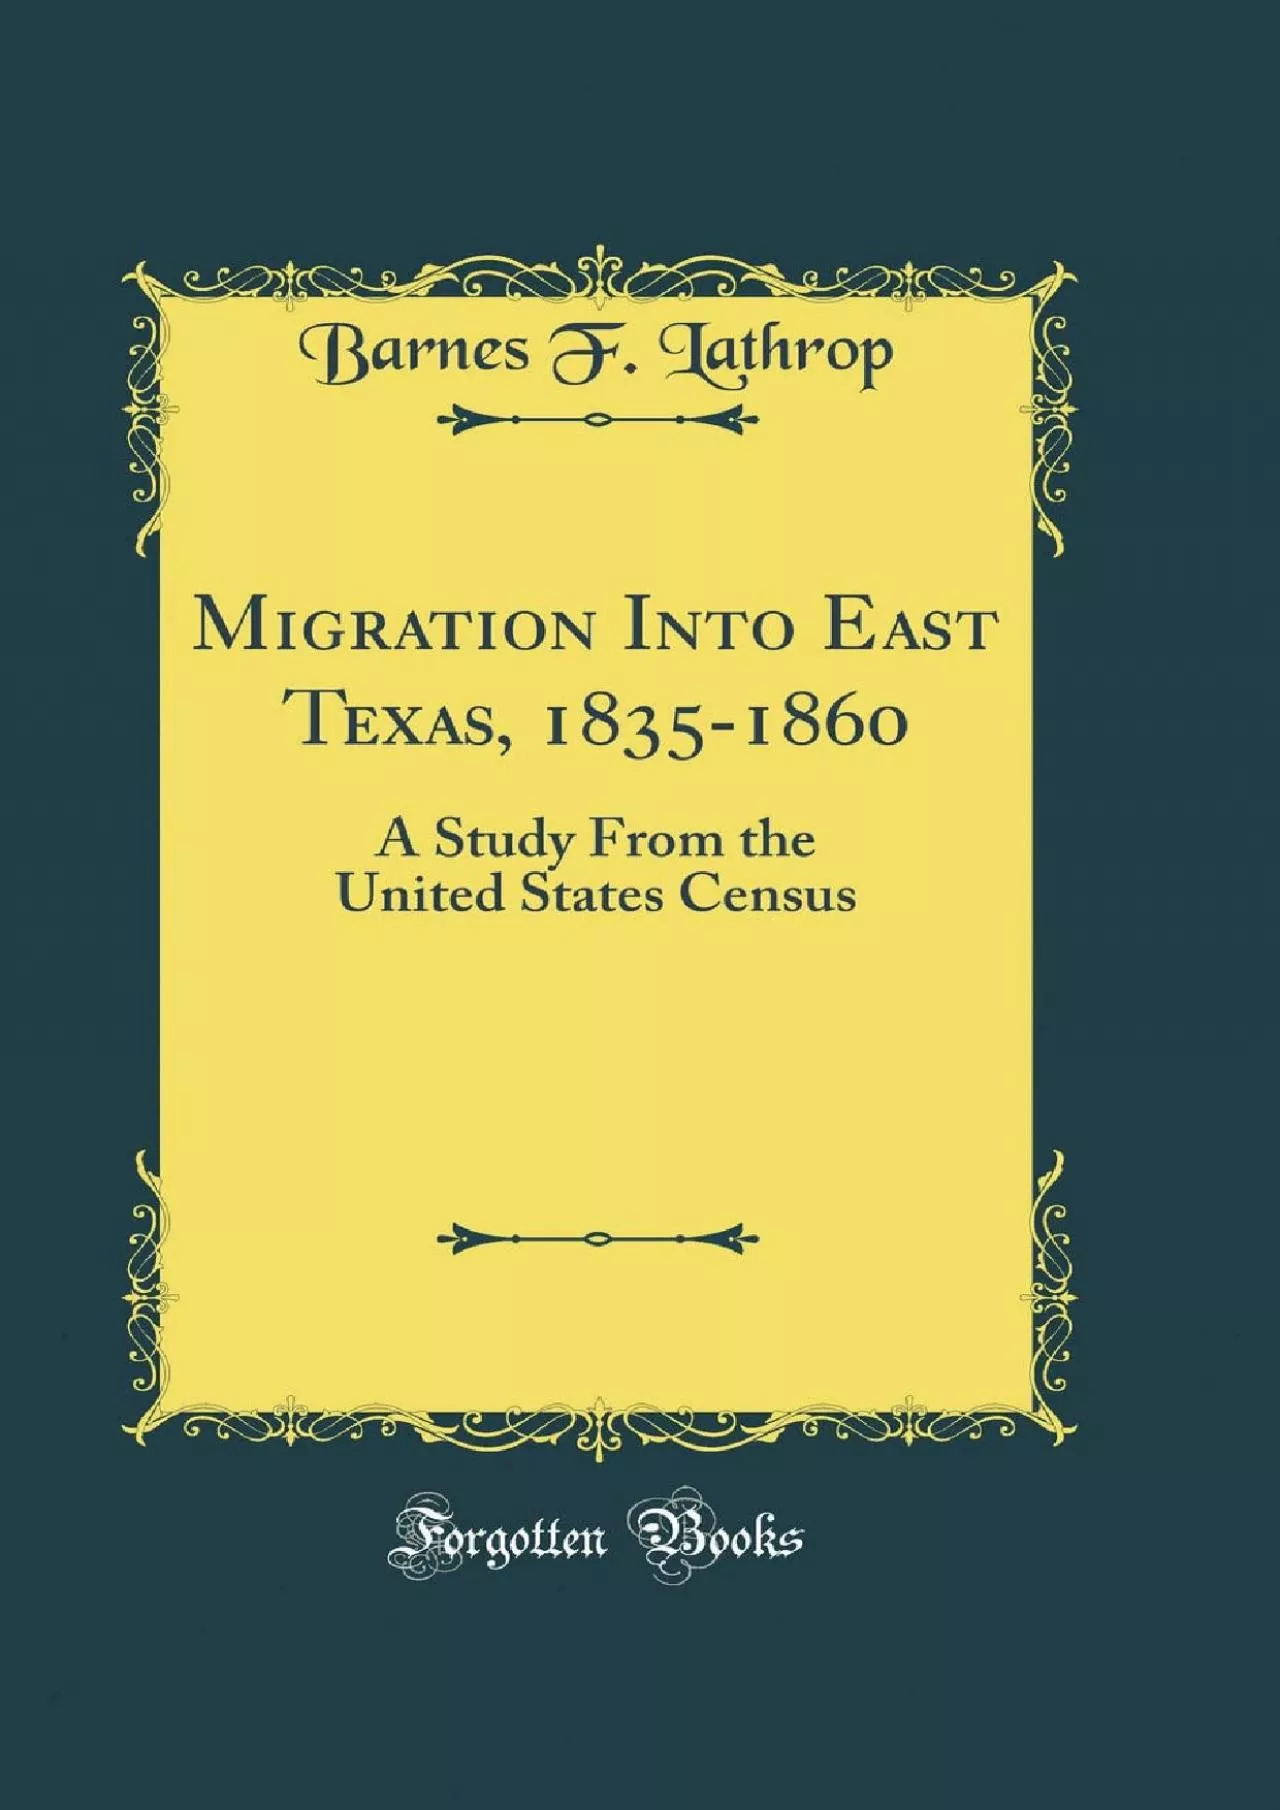 (BOOK)-Migration Into East Texas, 1835-1860: A Study From the United States Census (Classic